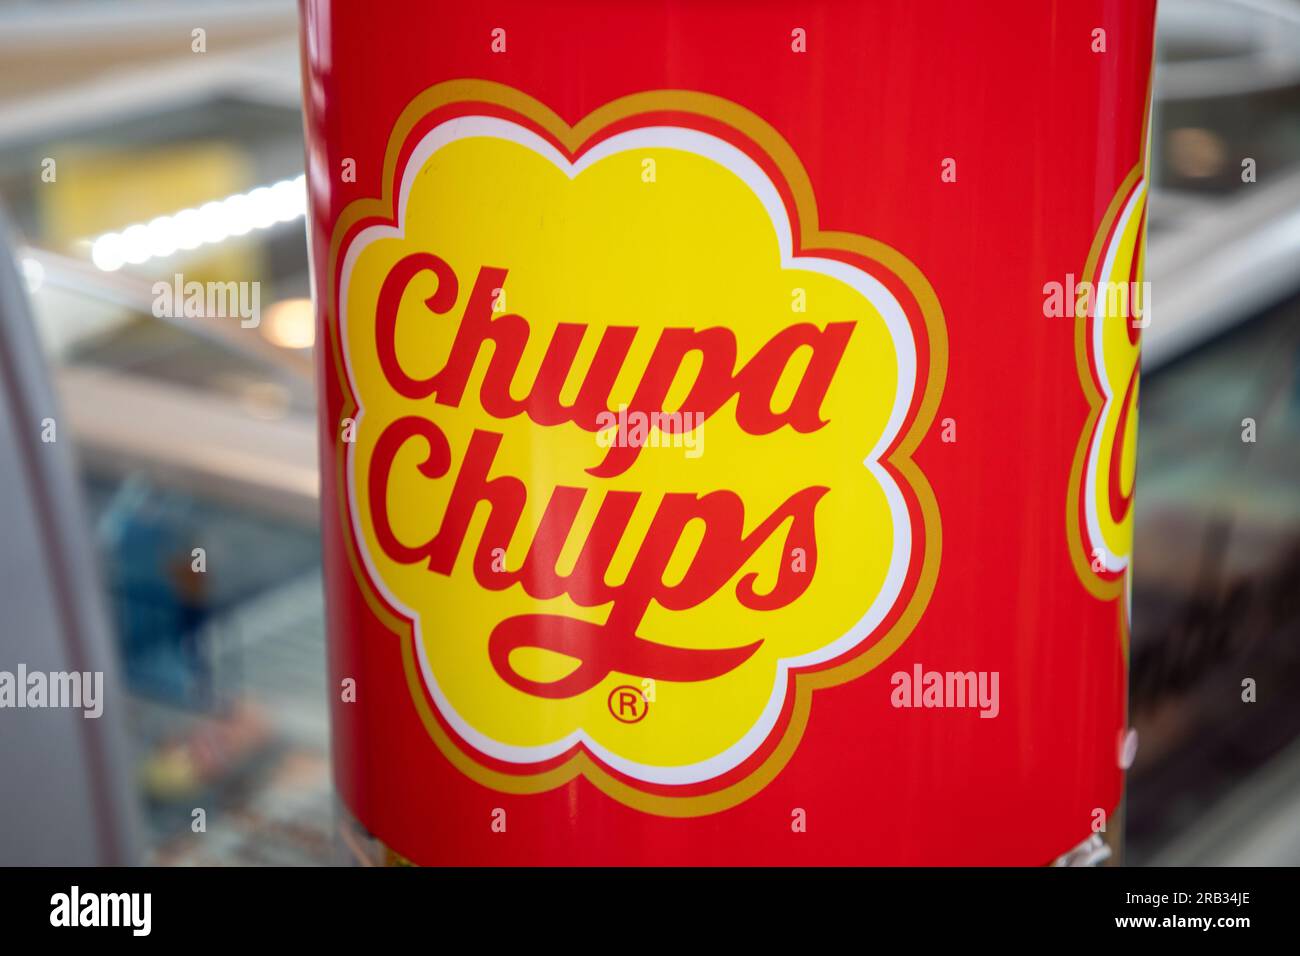 Bordeaux , France - 07 05 2023 : Chupa Chups logo text and Spanish brand  sign advertising lollipop confectionery barrel Stock Photo - Alamy